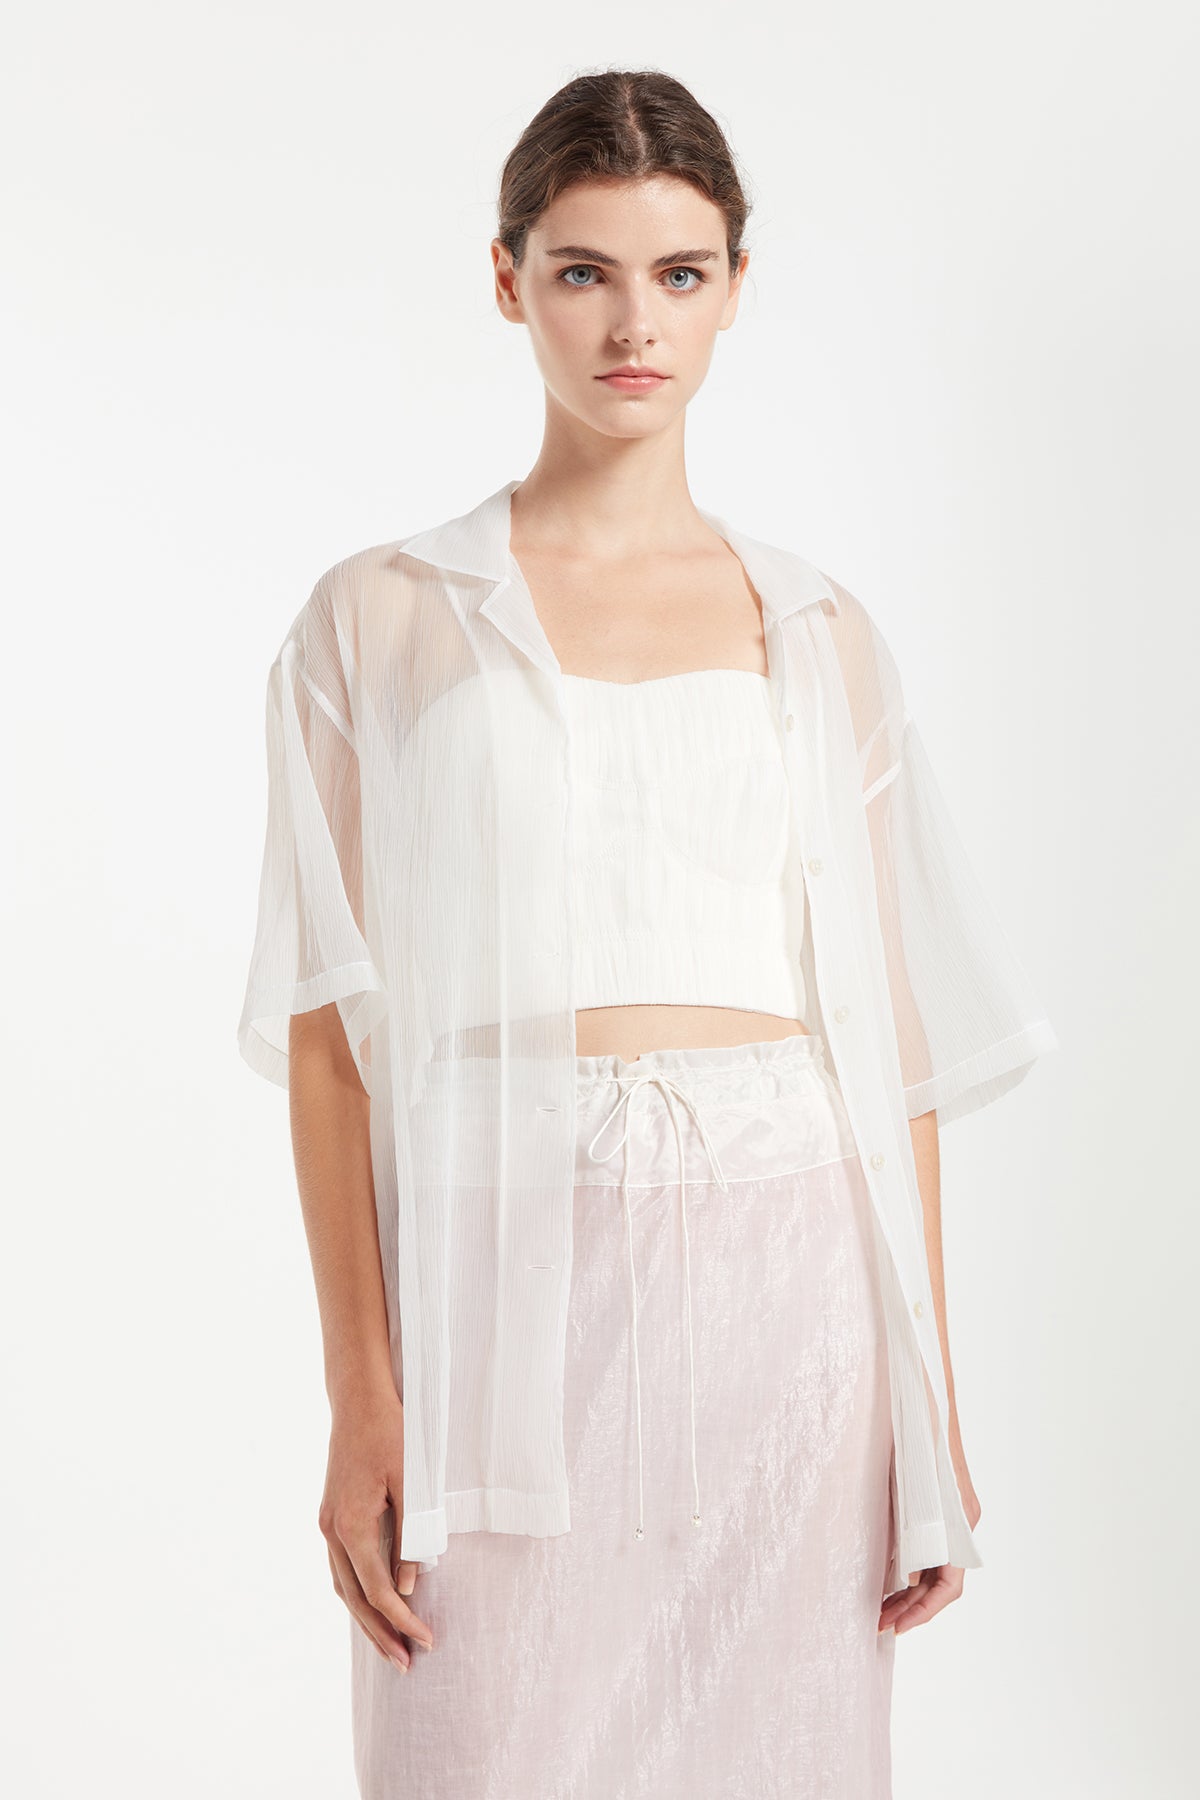 Floris Shirt in Soft White| Noon by Noor